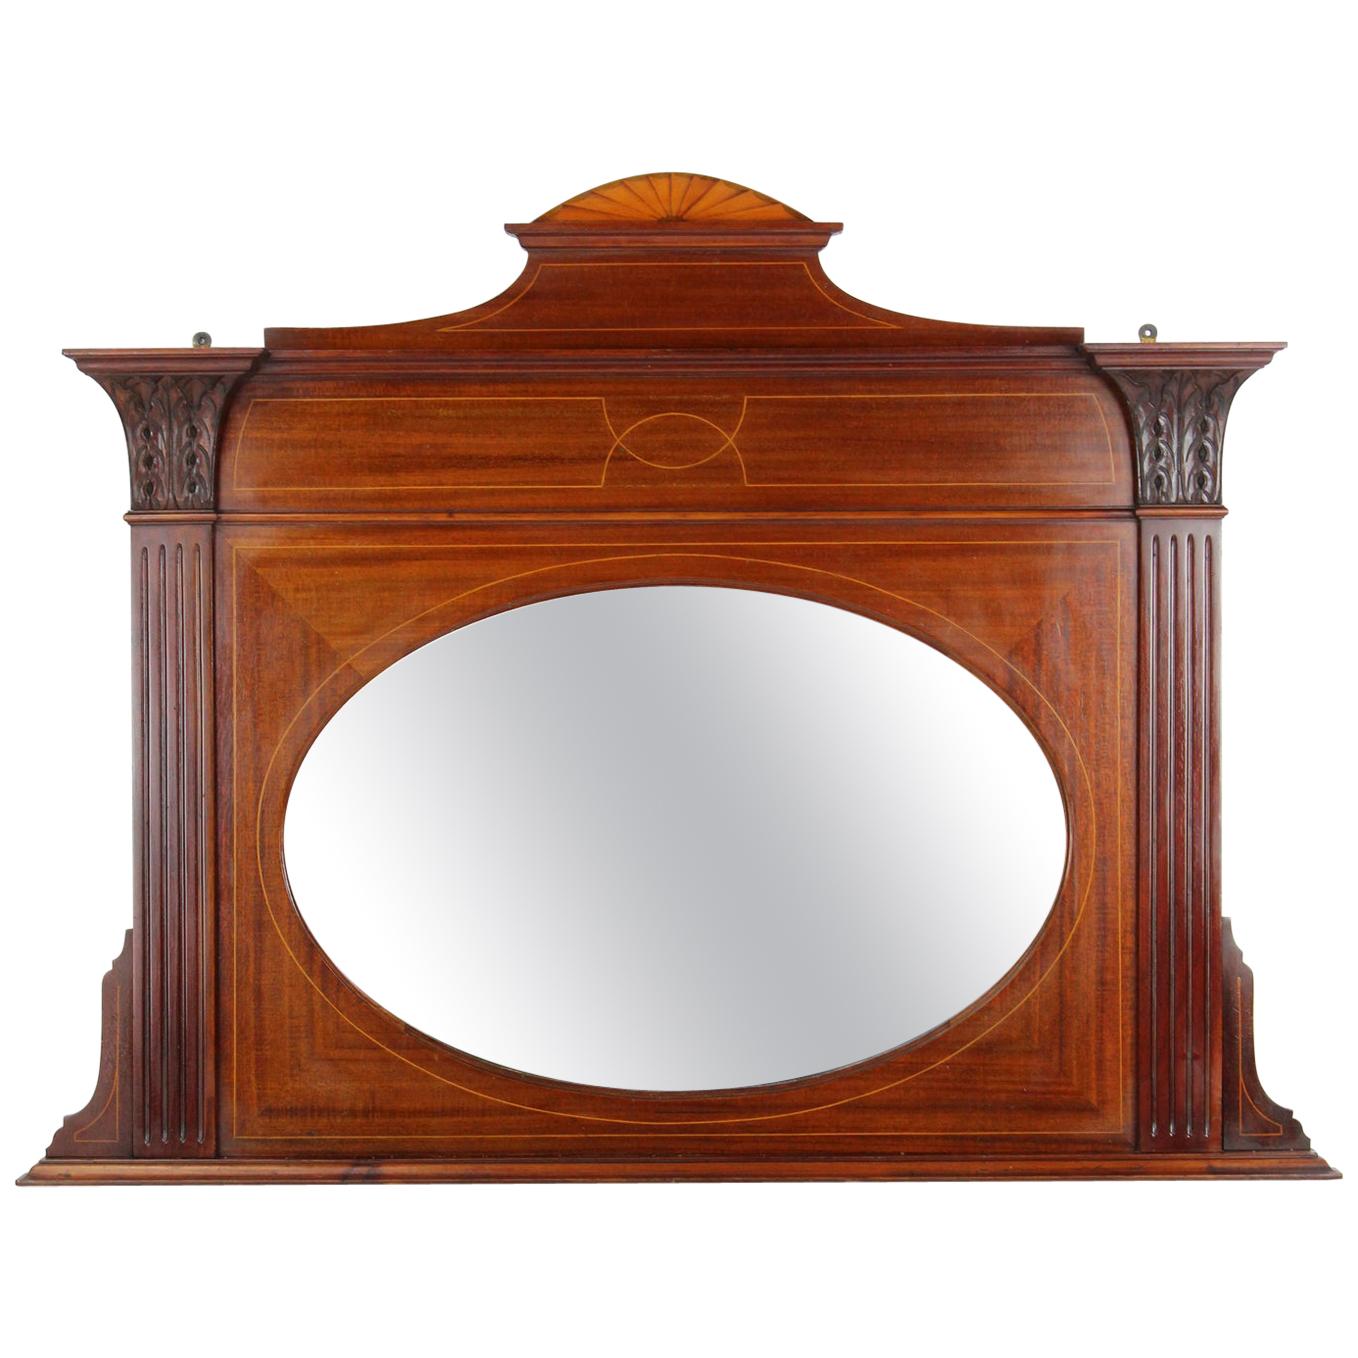 Antique English Edwardian Mahogany Overmantle Mirror, circa 1905 Overmantel  For Sale